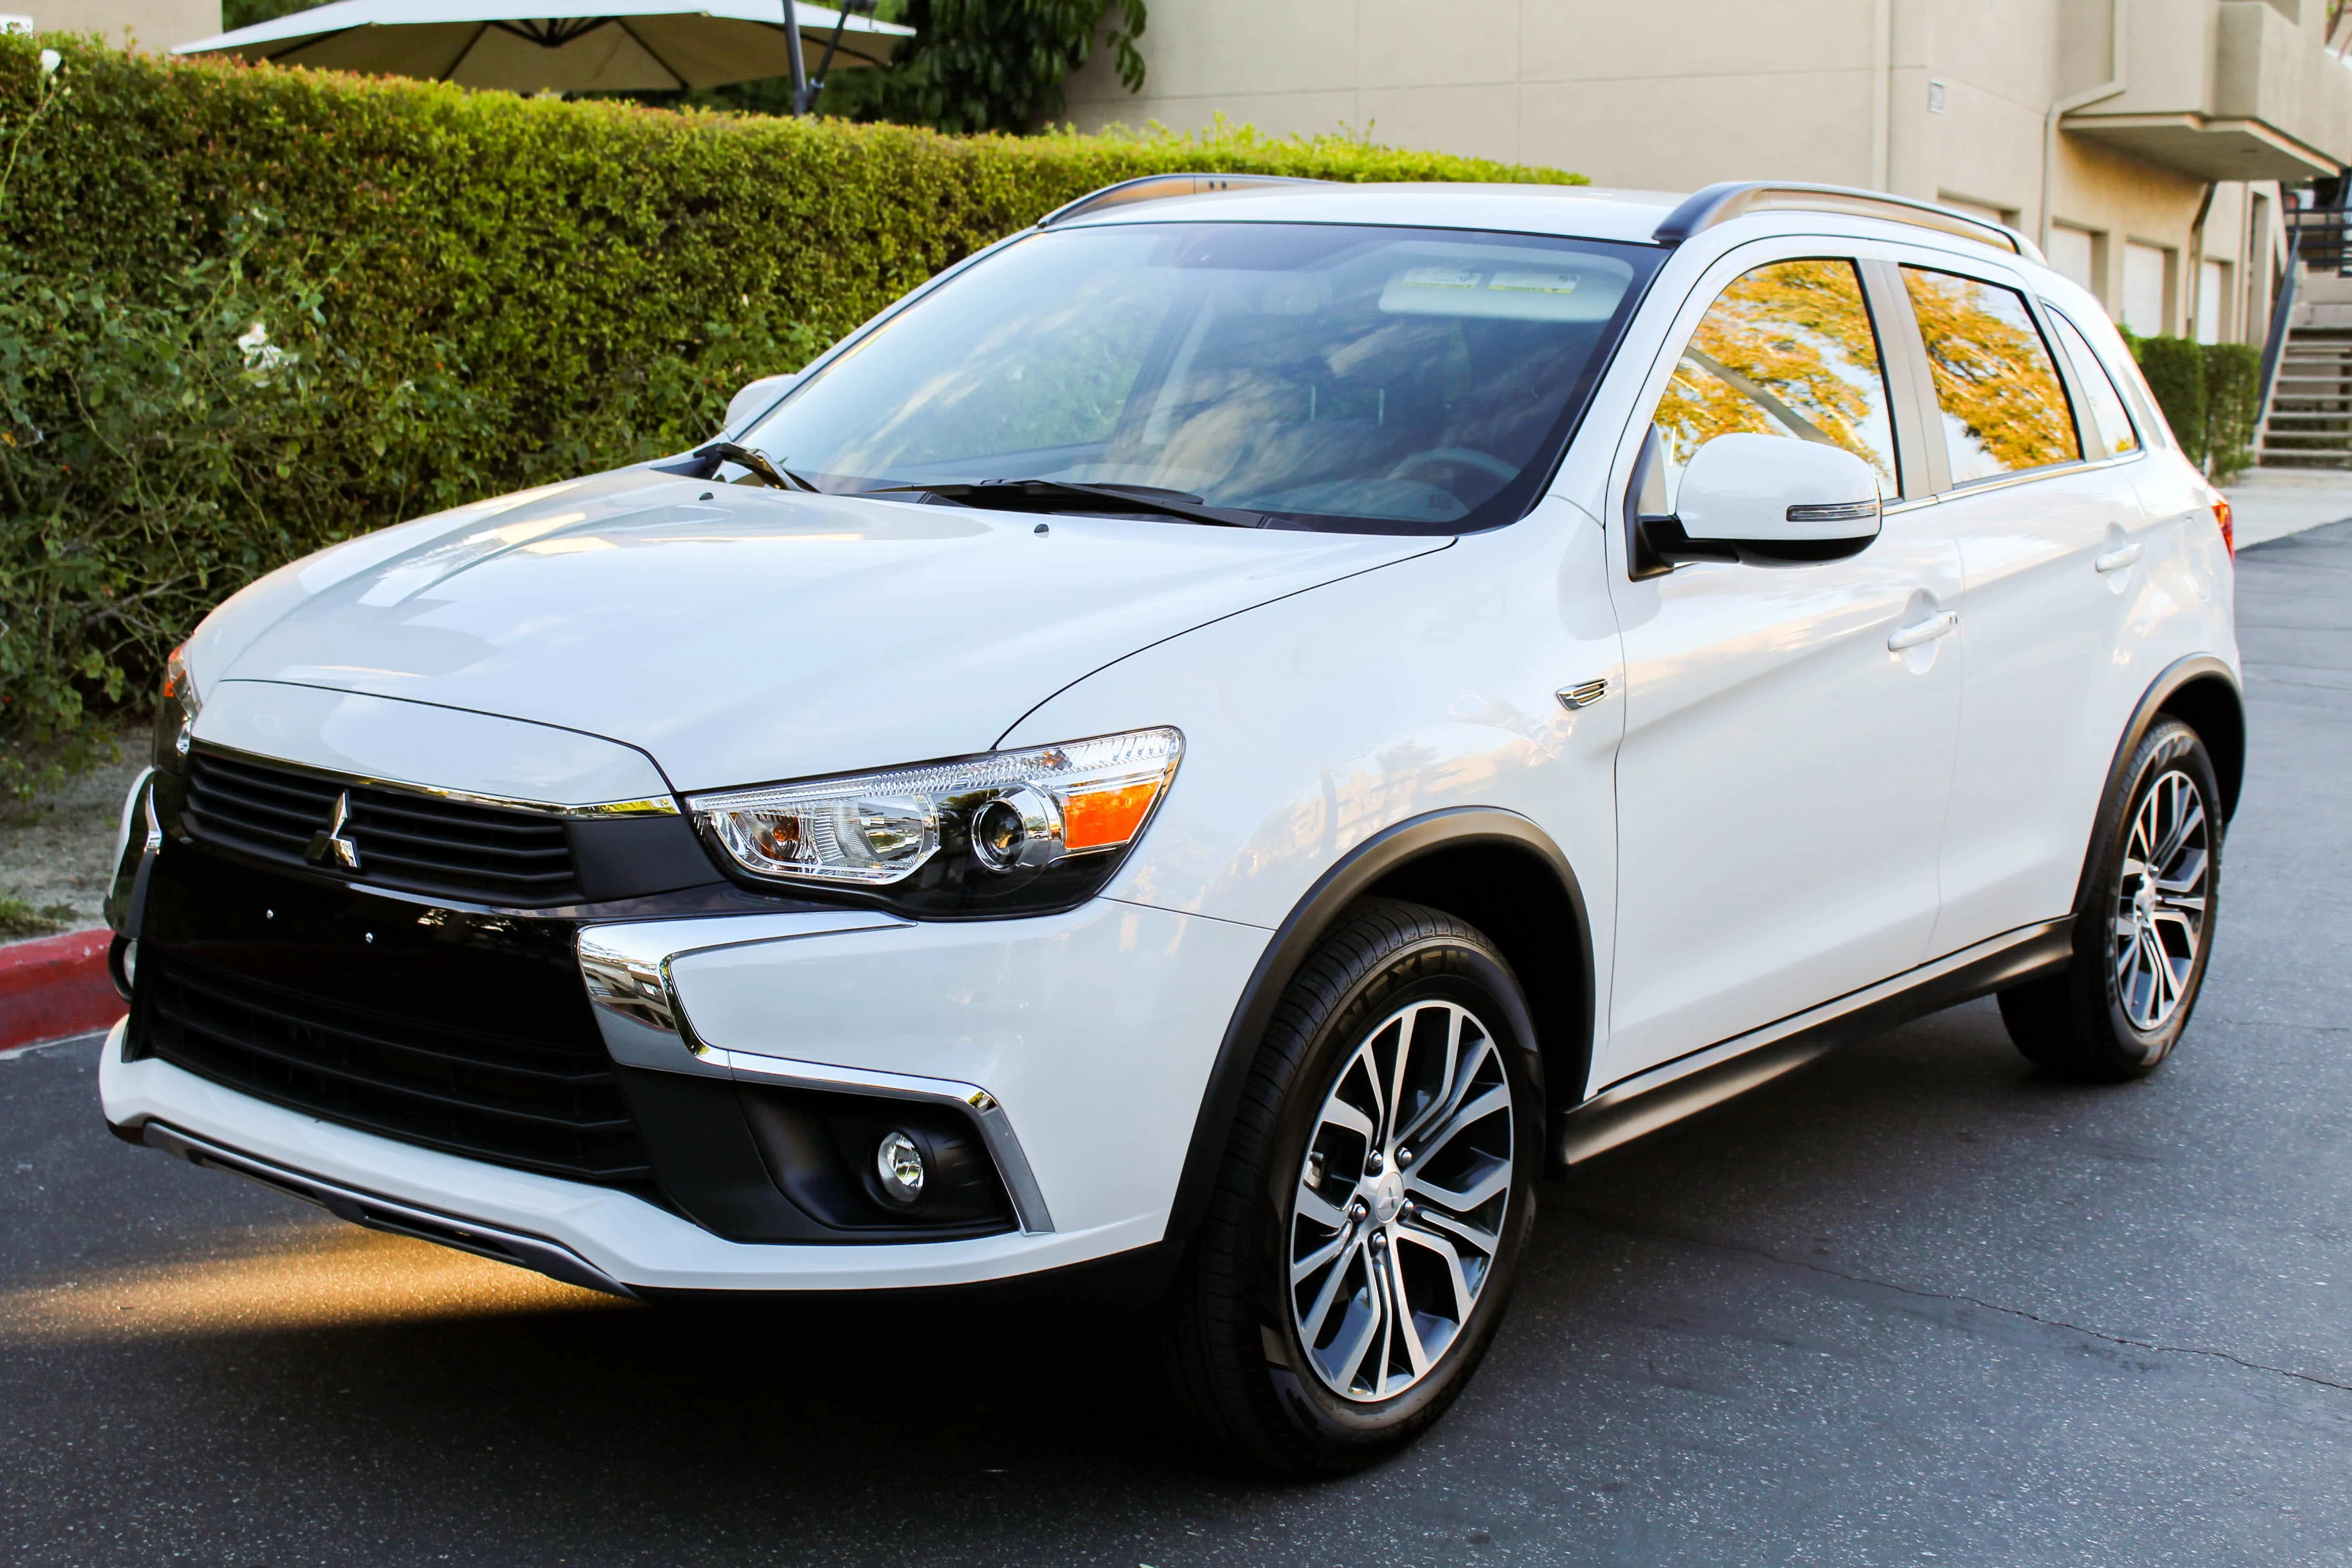 Imagine driving a vehicle that is as sleek on the inside as the outside. Meet the all new 2017 Mitsubishi Outlander Sport - a vehicle that has everything you want, plus some. It's the perfect vehicle not only for road trips, but for every day tasks such as picking up the groceries.